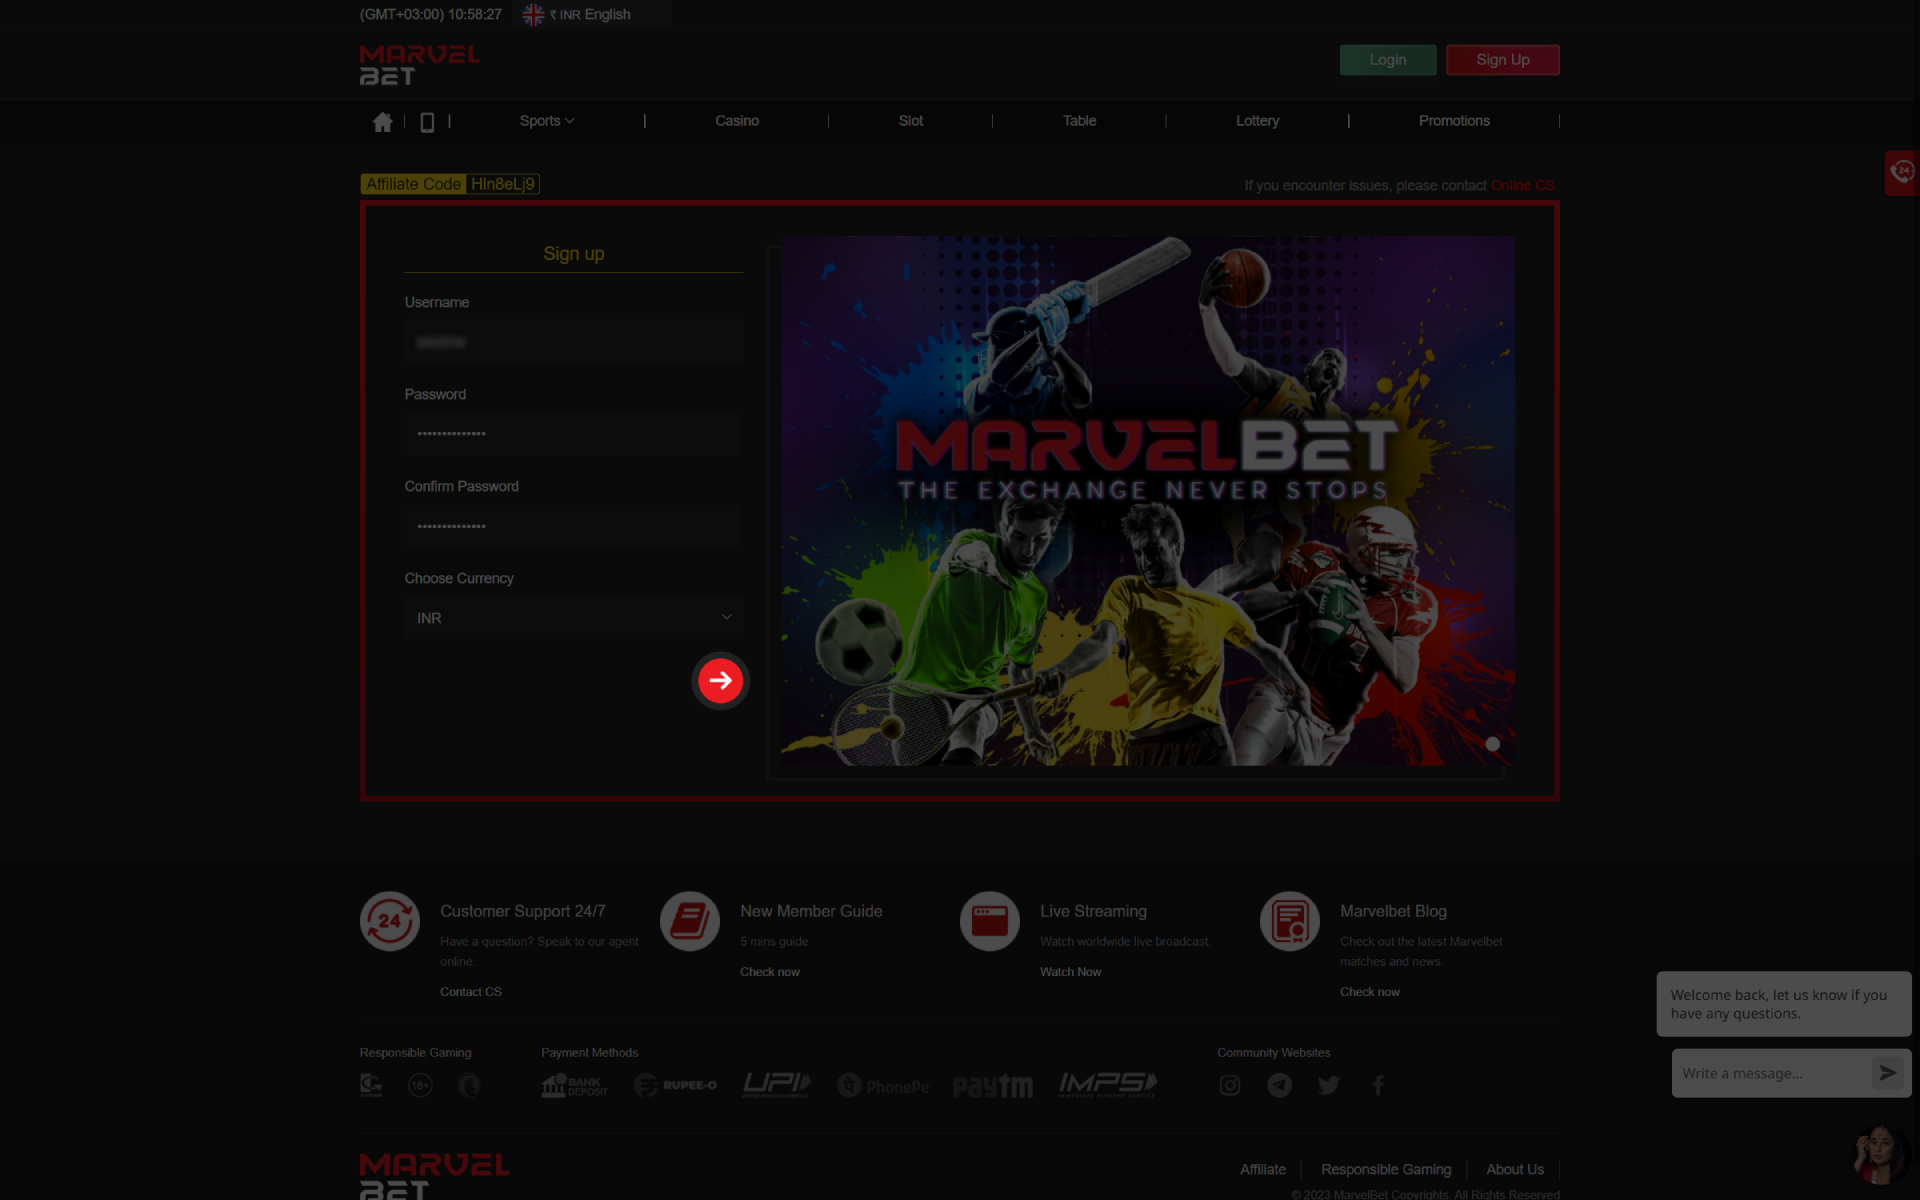 Check the correctness of the data and go on to Marvelbet.